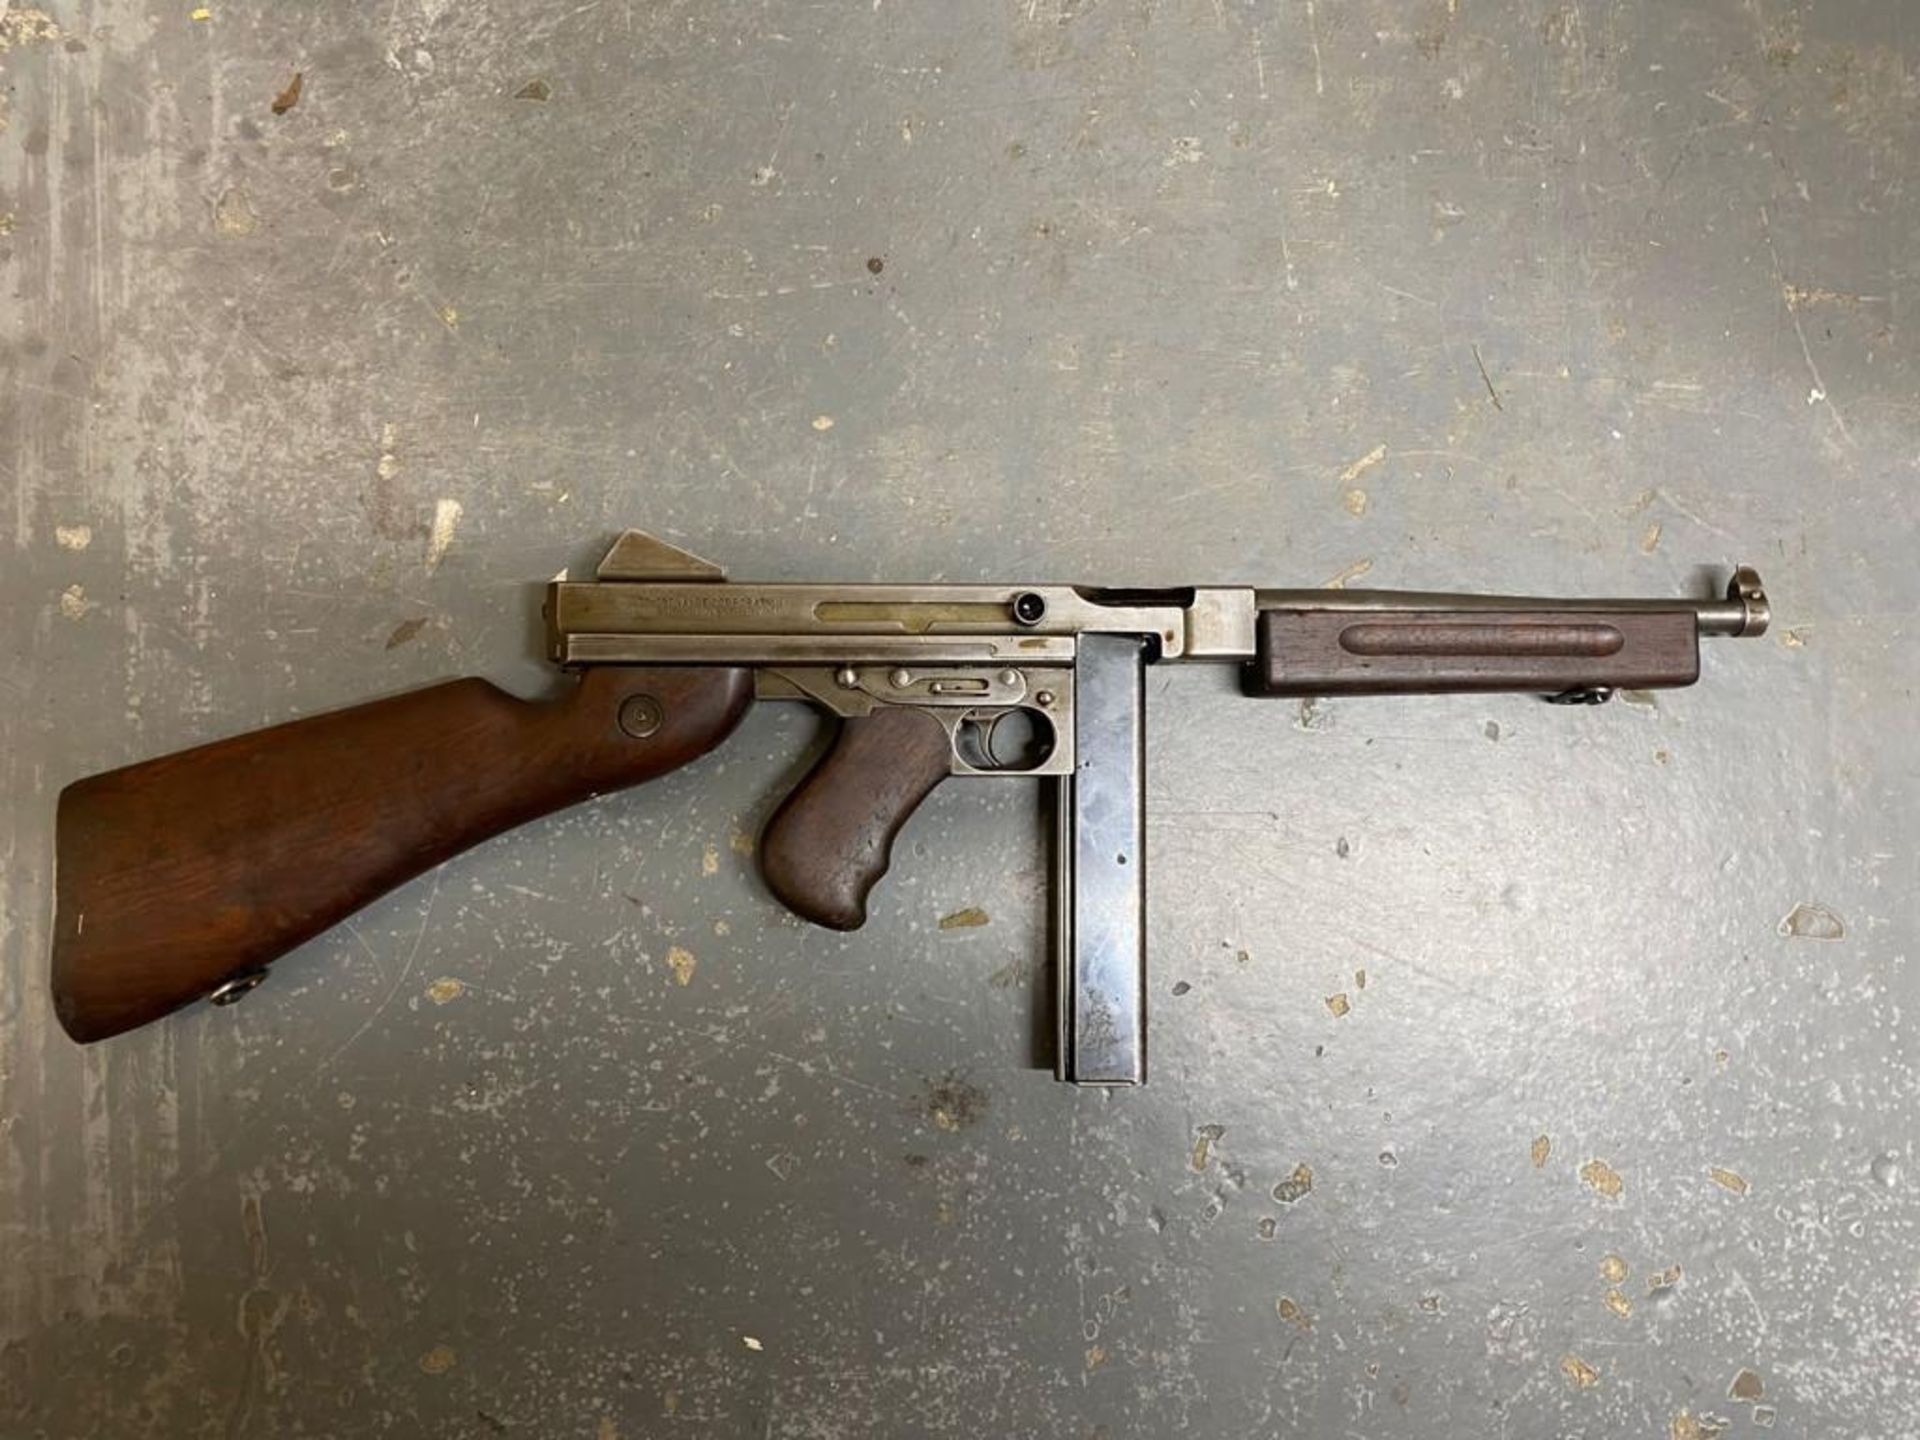 A Deactivated WW2 USA Thompson Sub Machine Gun - M1A1 Model. This 'Tommy gun' has a rear moving bolt - Image 6 of 11